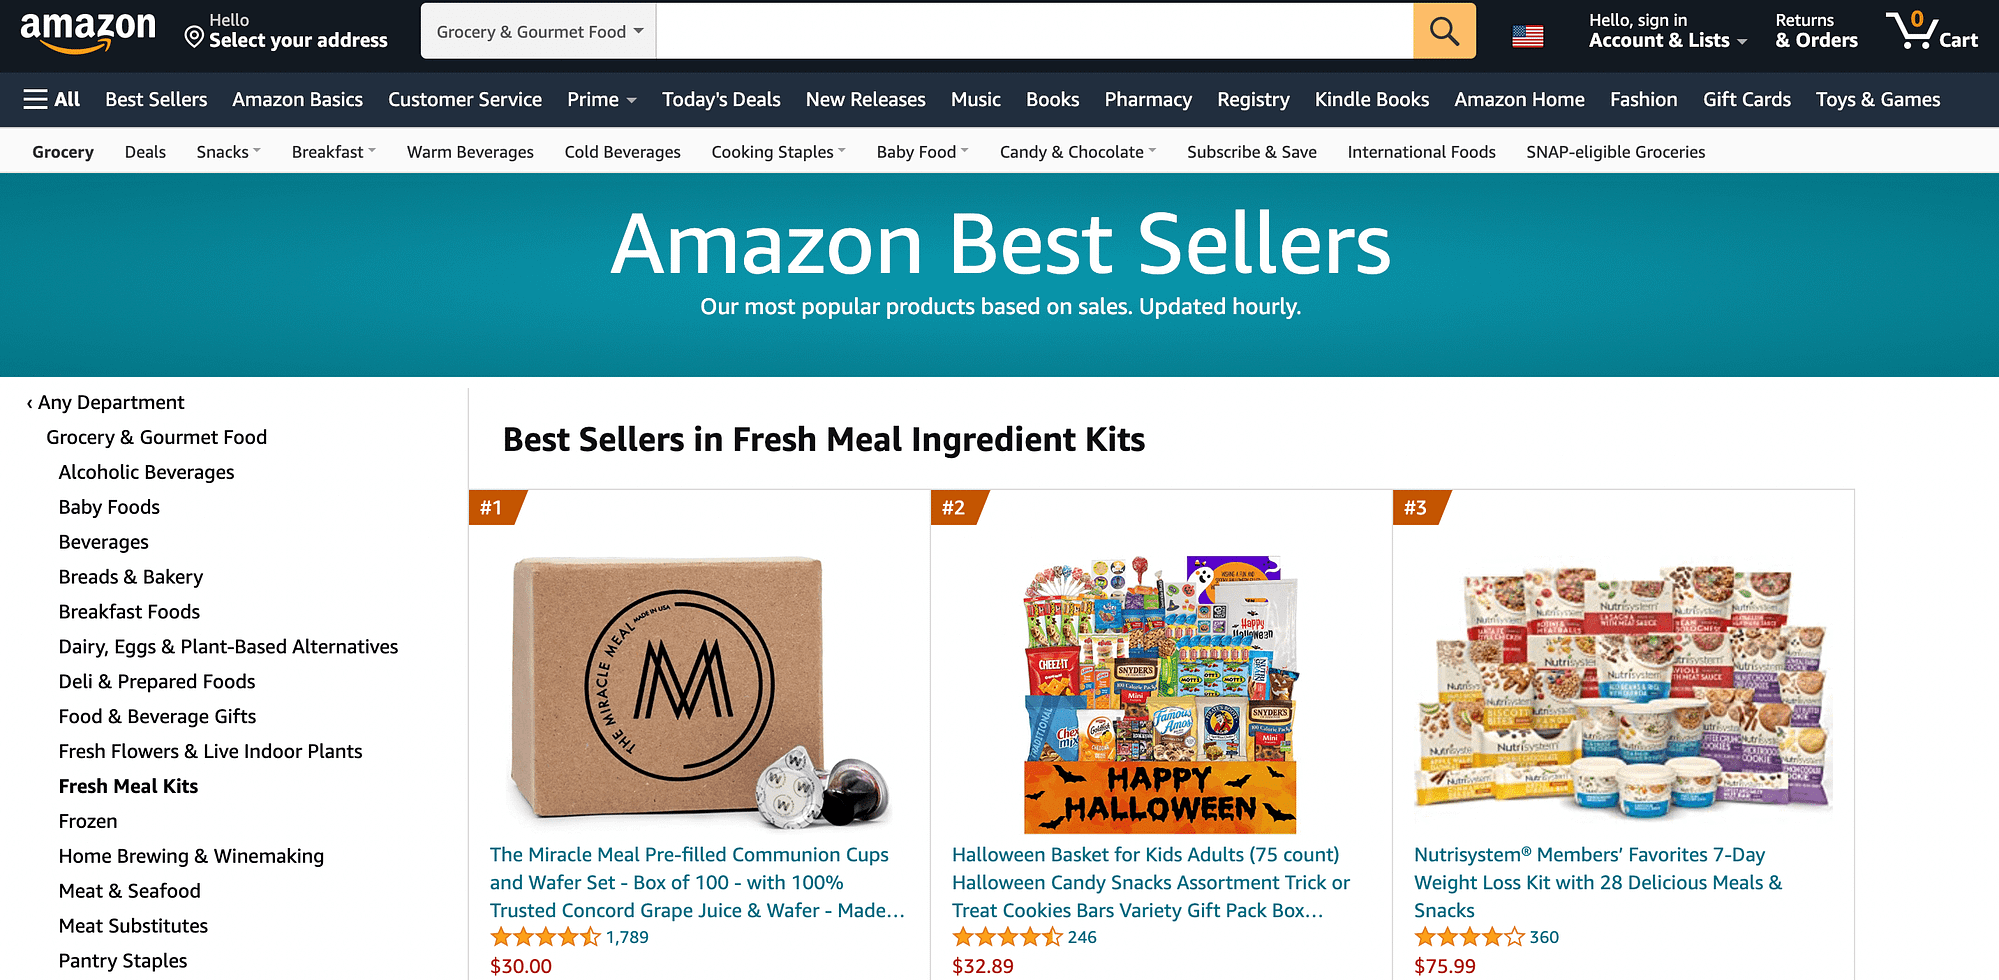 Best-selling Amazon products in the Fresh Meal Ingredient Kits category.